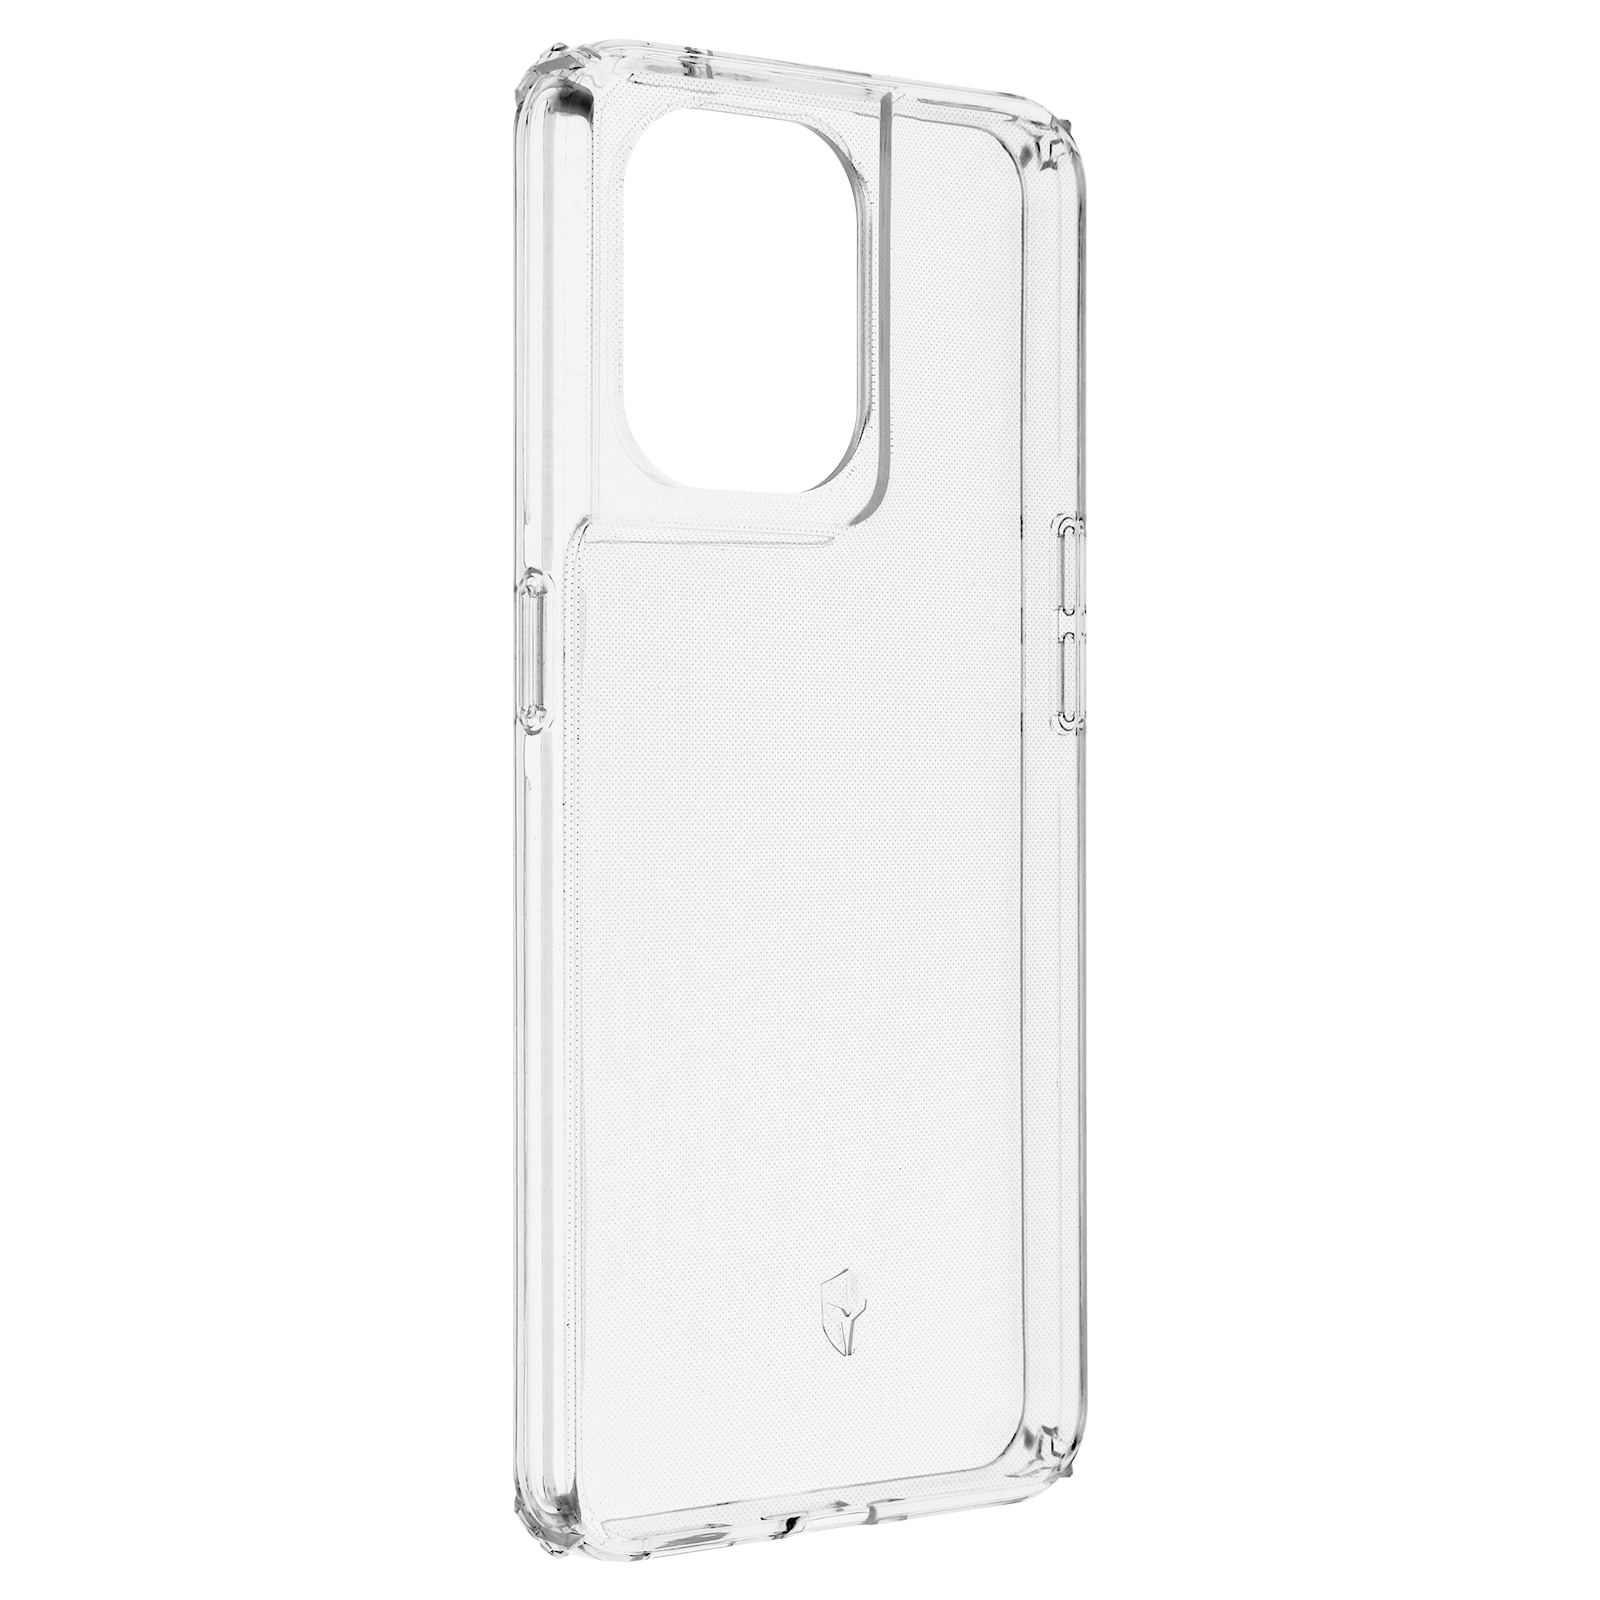 FORCE CASE Feel Series, Backcover, Transparent Oppo Reno Oppo, 8